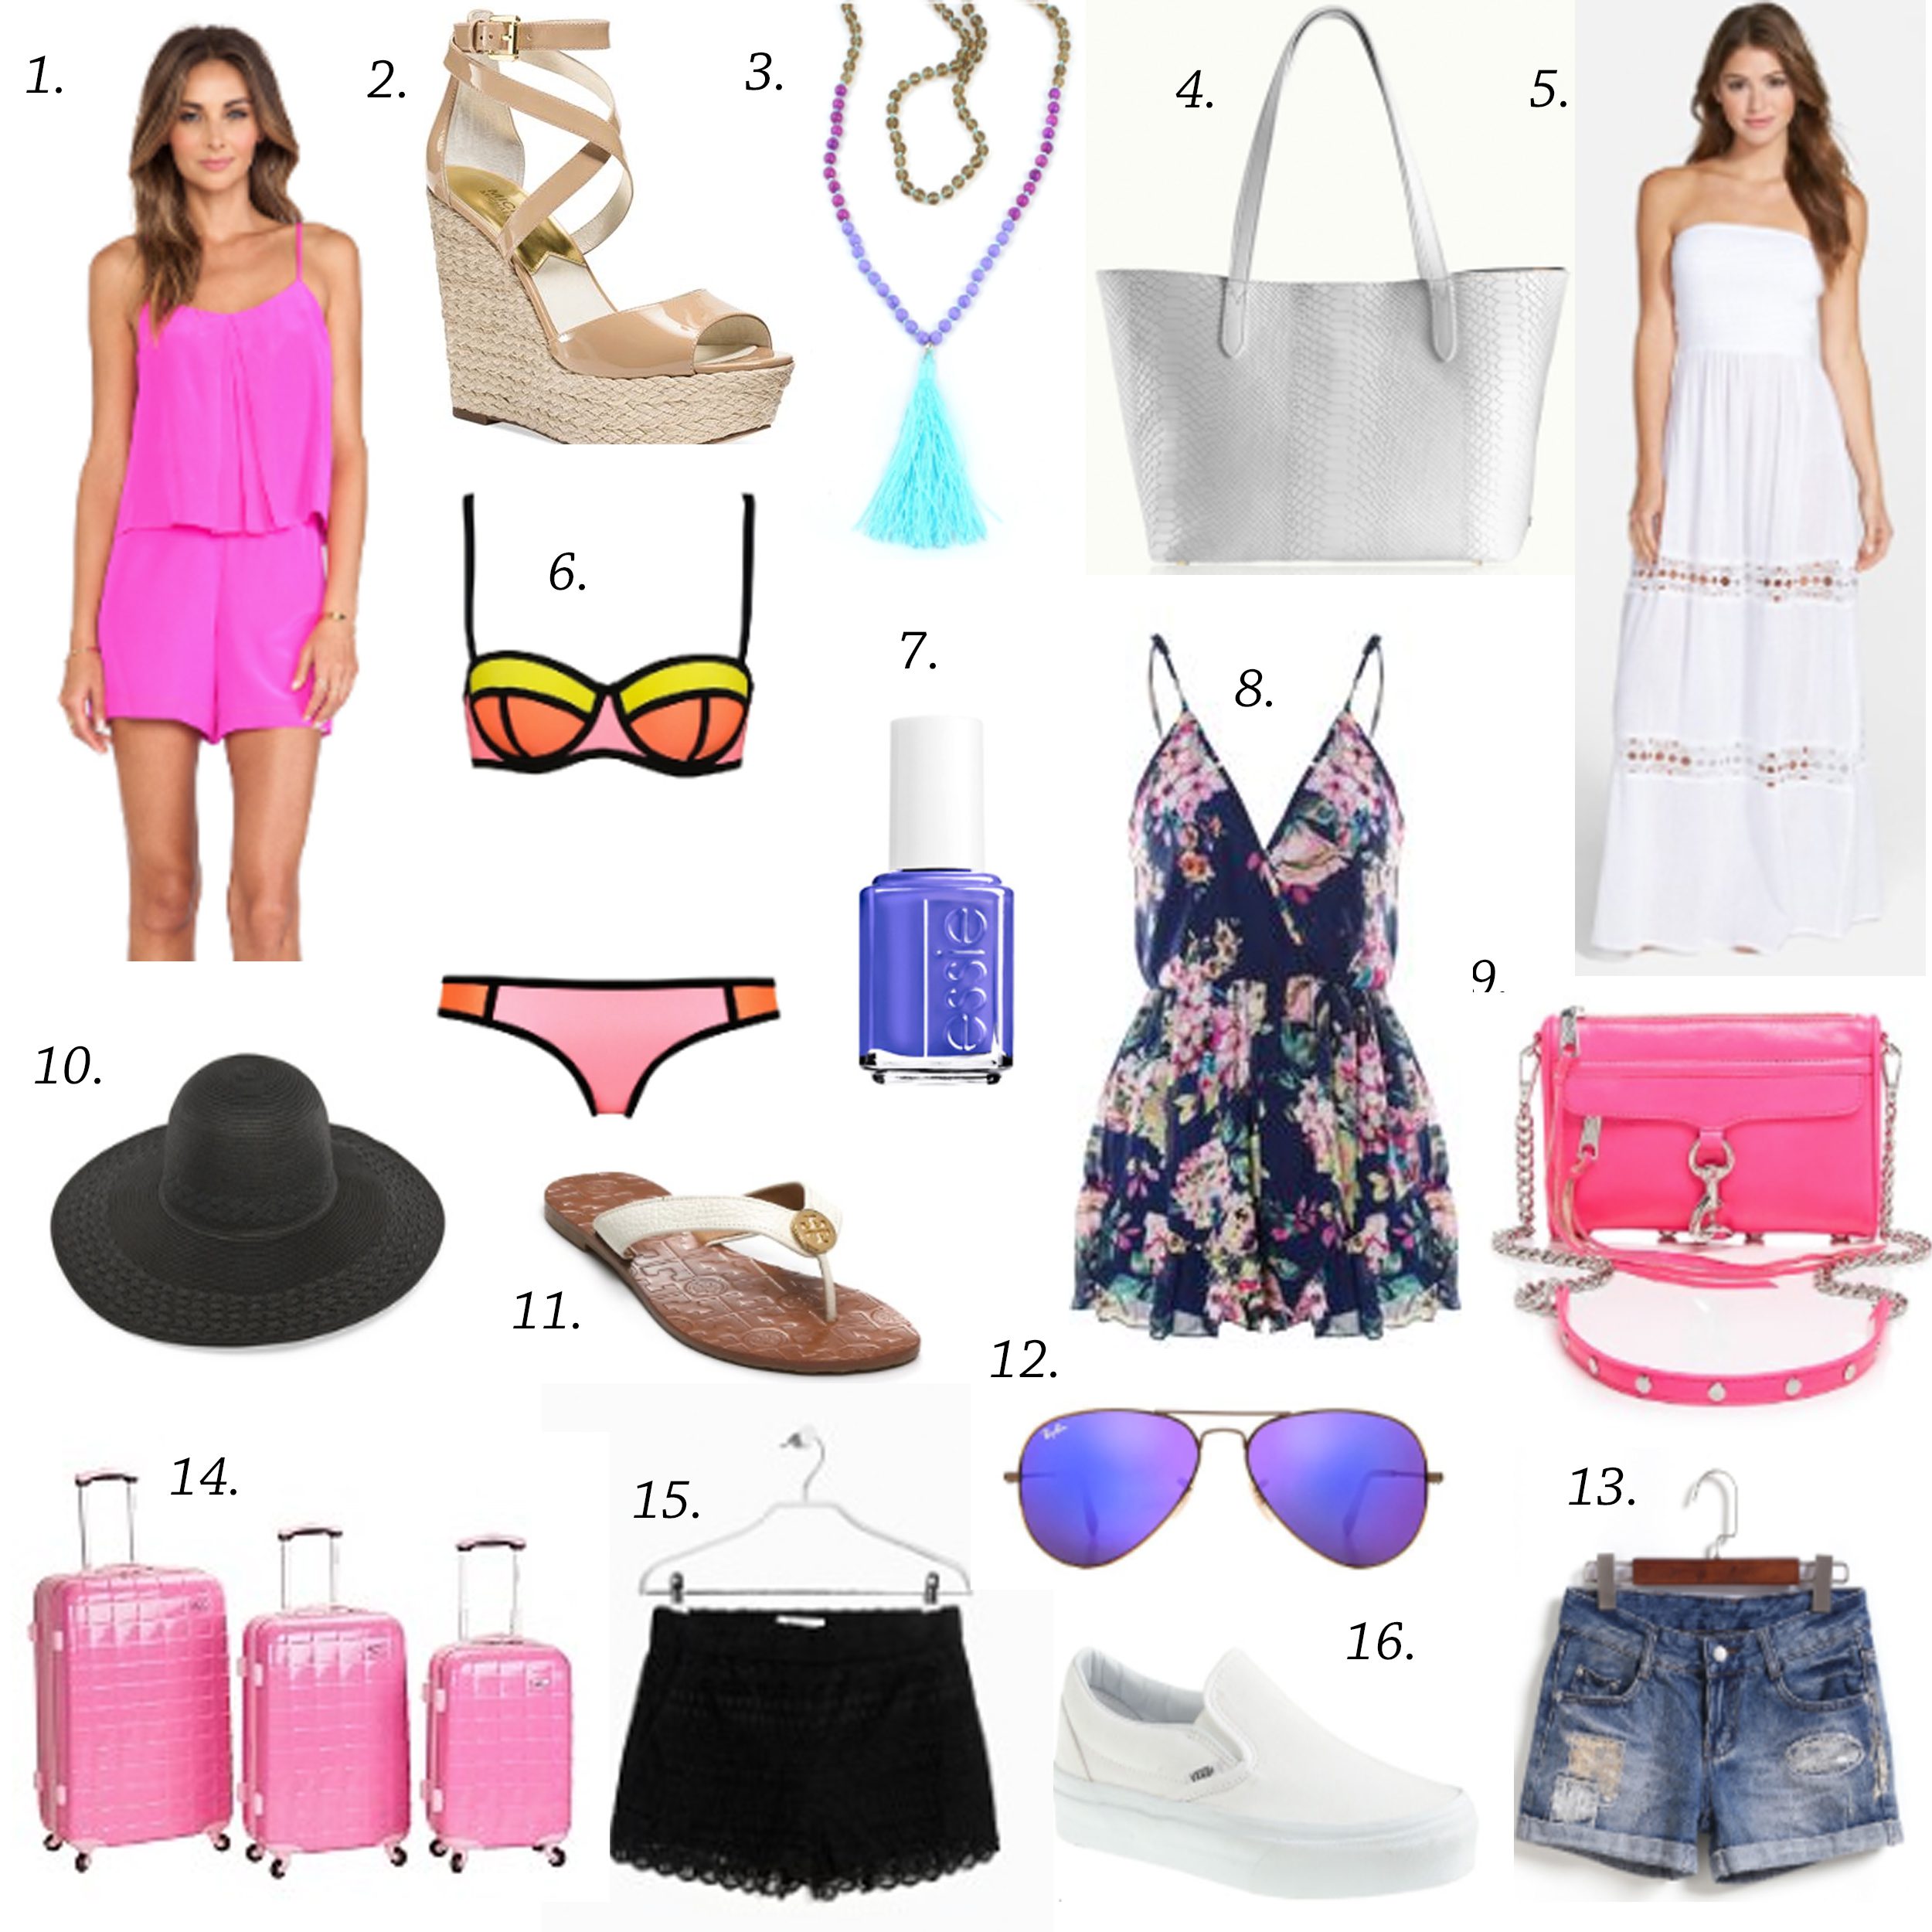 missyonmadison, shopping, shopping guide, online shopping, flip flops, tory burch, tory burch sandals, gigi ny, gigi ny tote, rebecca minkoff, rebecca minkoff mini mac bag, hot pink bag, hot pink mini mac bag, crochet shorts, denim shorts, white slip on sneakers, mirrored aviators, ray bans, white maxi dress, triangle swimwear, neon bikini, cover up, hot pink romper, romper, floral romper, choies romper, colorful comper, tan wedges, nude wedges, espadrille wedges, michael kors wedges, pink suitcase, black floppy hat, beach hat, what to wear to the beach, what to pack for vacation, los angeles, la, trip, travel guide, vacation guide,